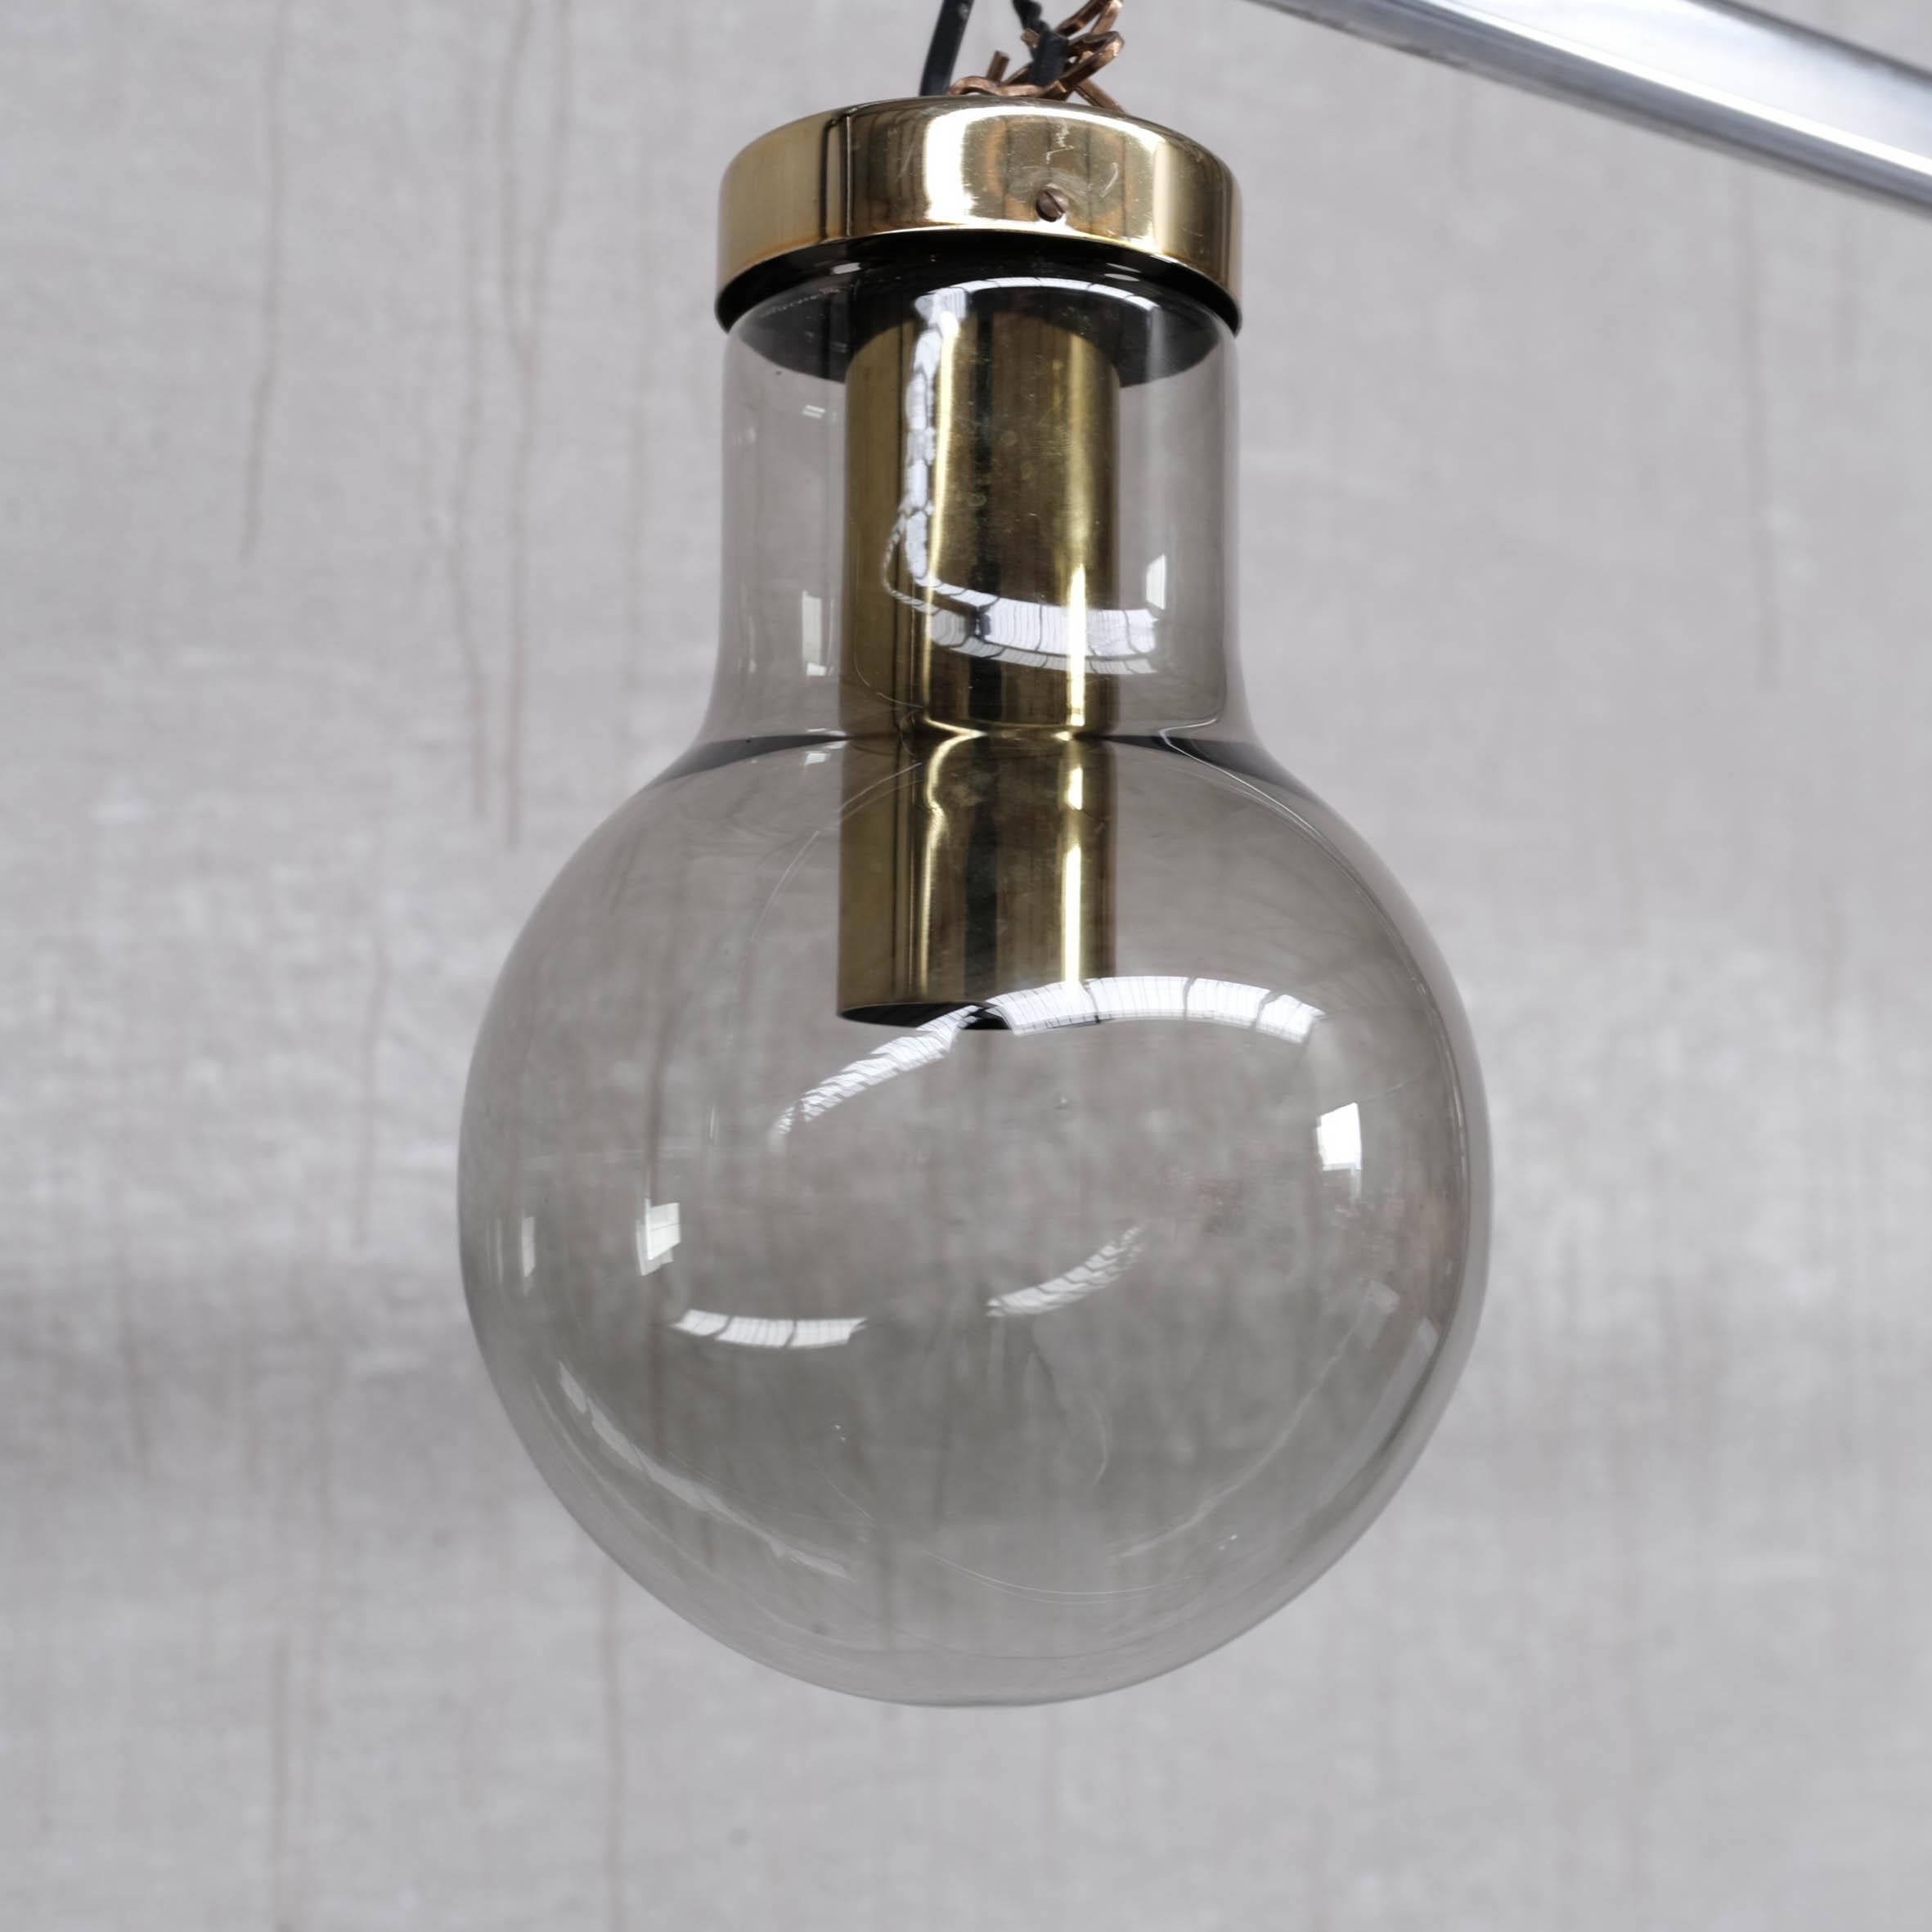 Smoked Midcentury Glass and Brass Pendant Lights by RAAK, '6 Available' For Sale 1